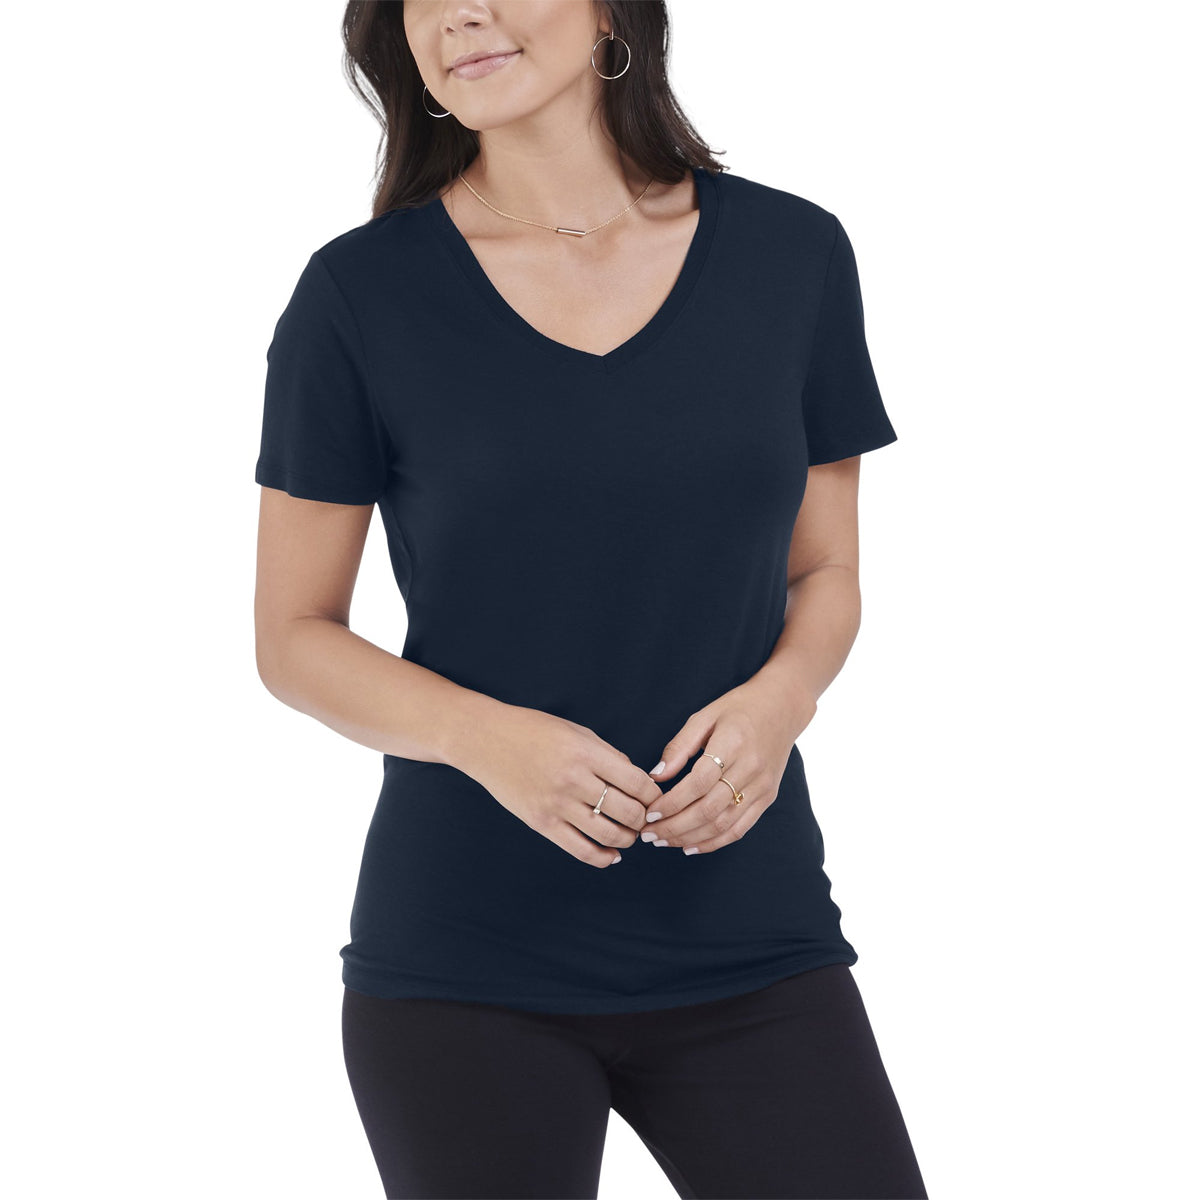 Seek No Further Women’s Short Sleeve T Shirt Ruched Top Plus Size